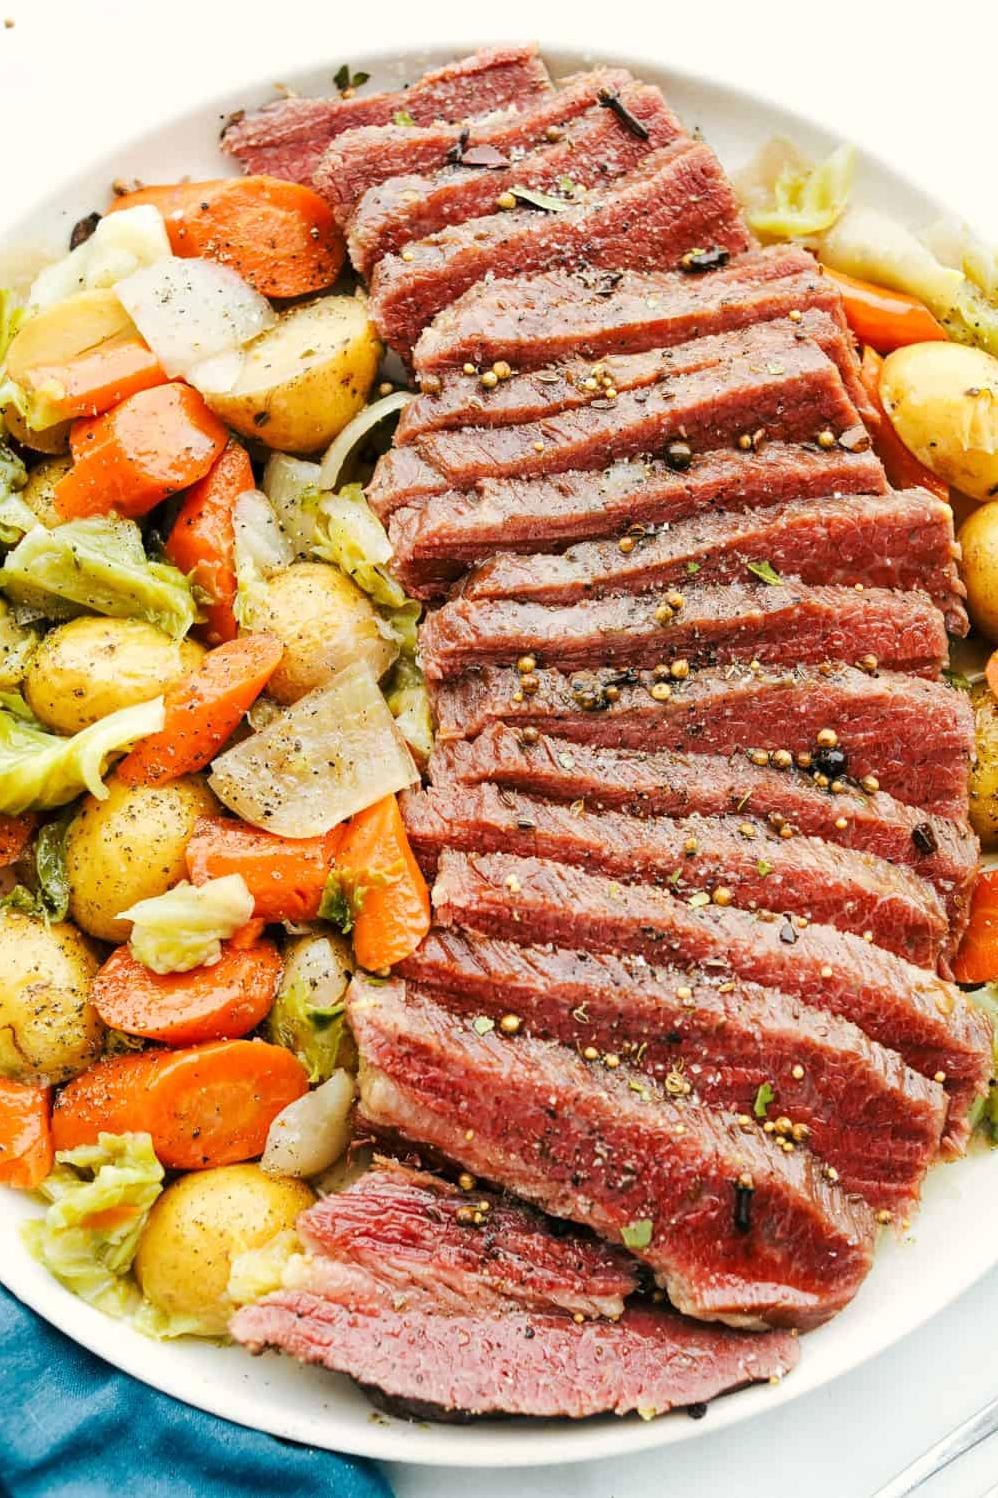 Mouth-watering Irish corned beef and cabbage recipe